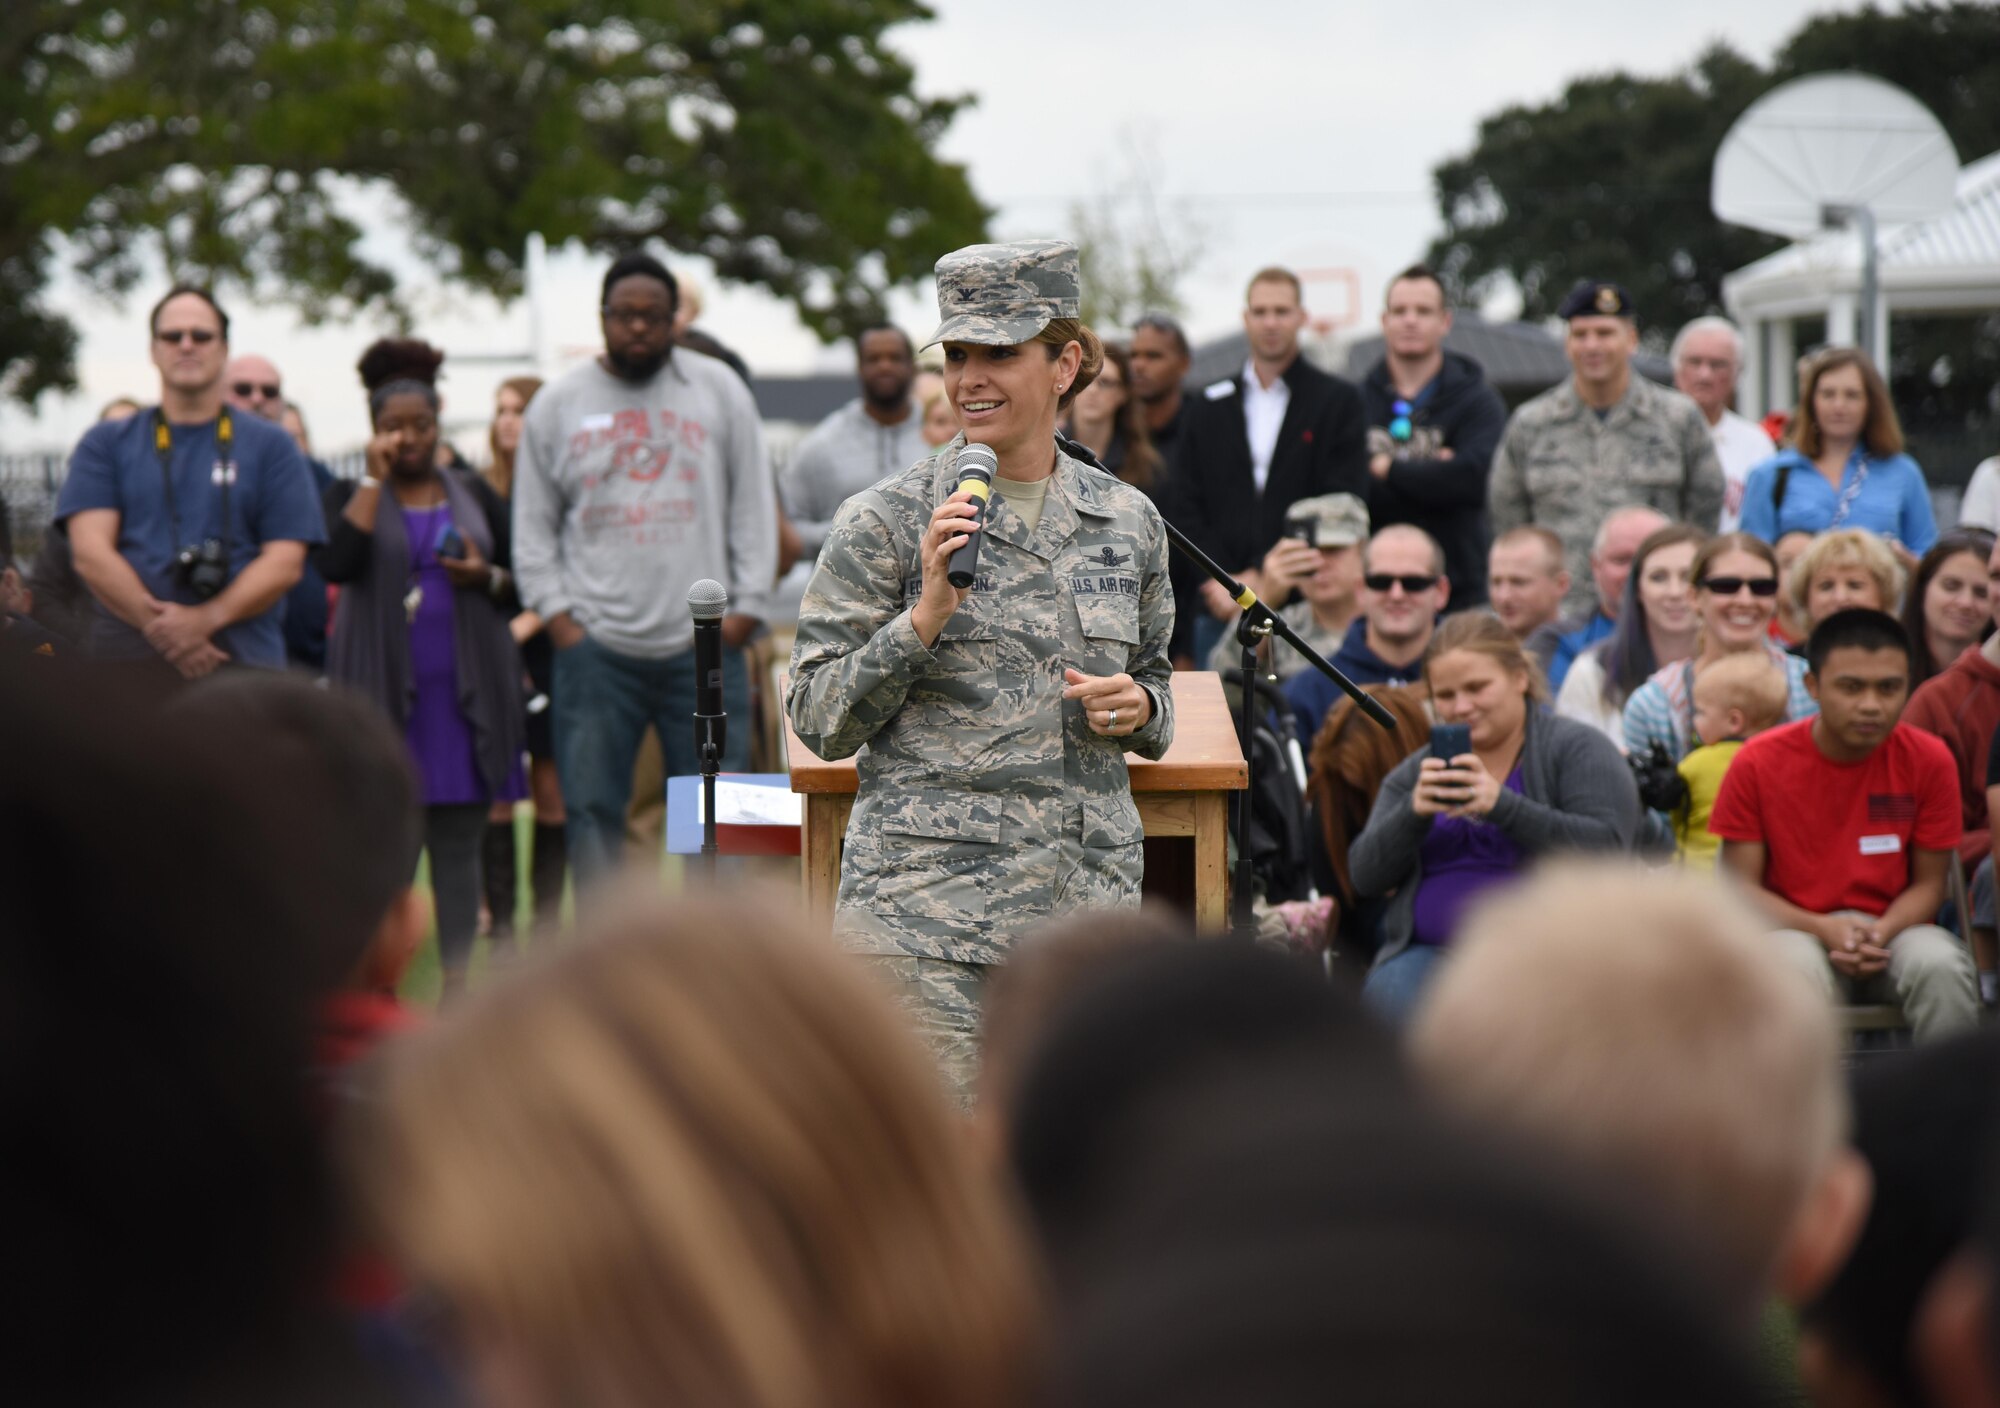 Col. Michele Edmondson, 81st Training Wing commander, delivers remarks during a Jeff Davis Elementary School Veterans Day Celebration Nov. 11, 2016, in Biloxi, Miss. During the event, students delivered the Pledge of Allegiance and sang several patriotic songs. The Keesler Honor Guard and other service members also participated in the event. (U.S. Air Force photo by Kemberly Groue/Released)